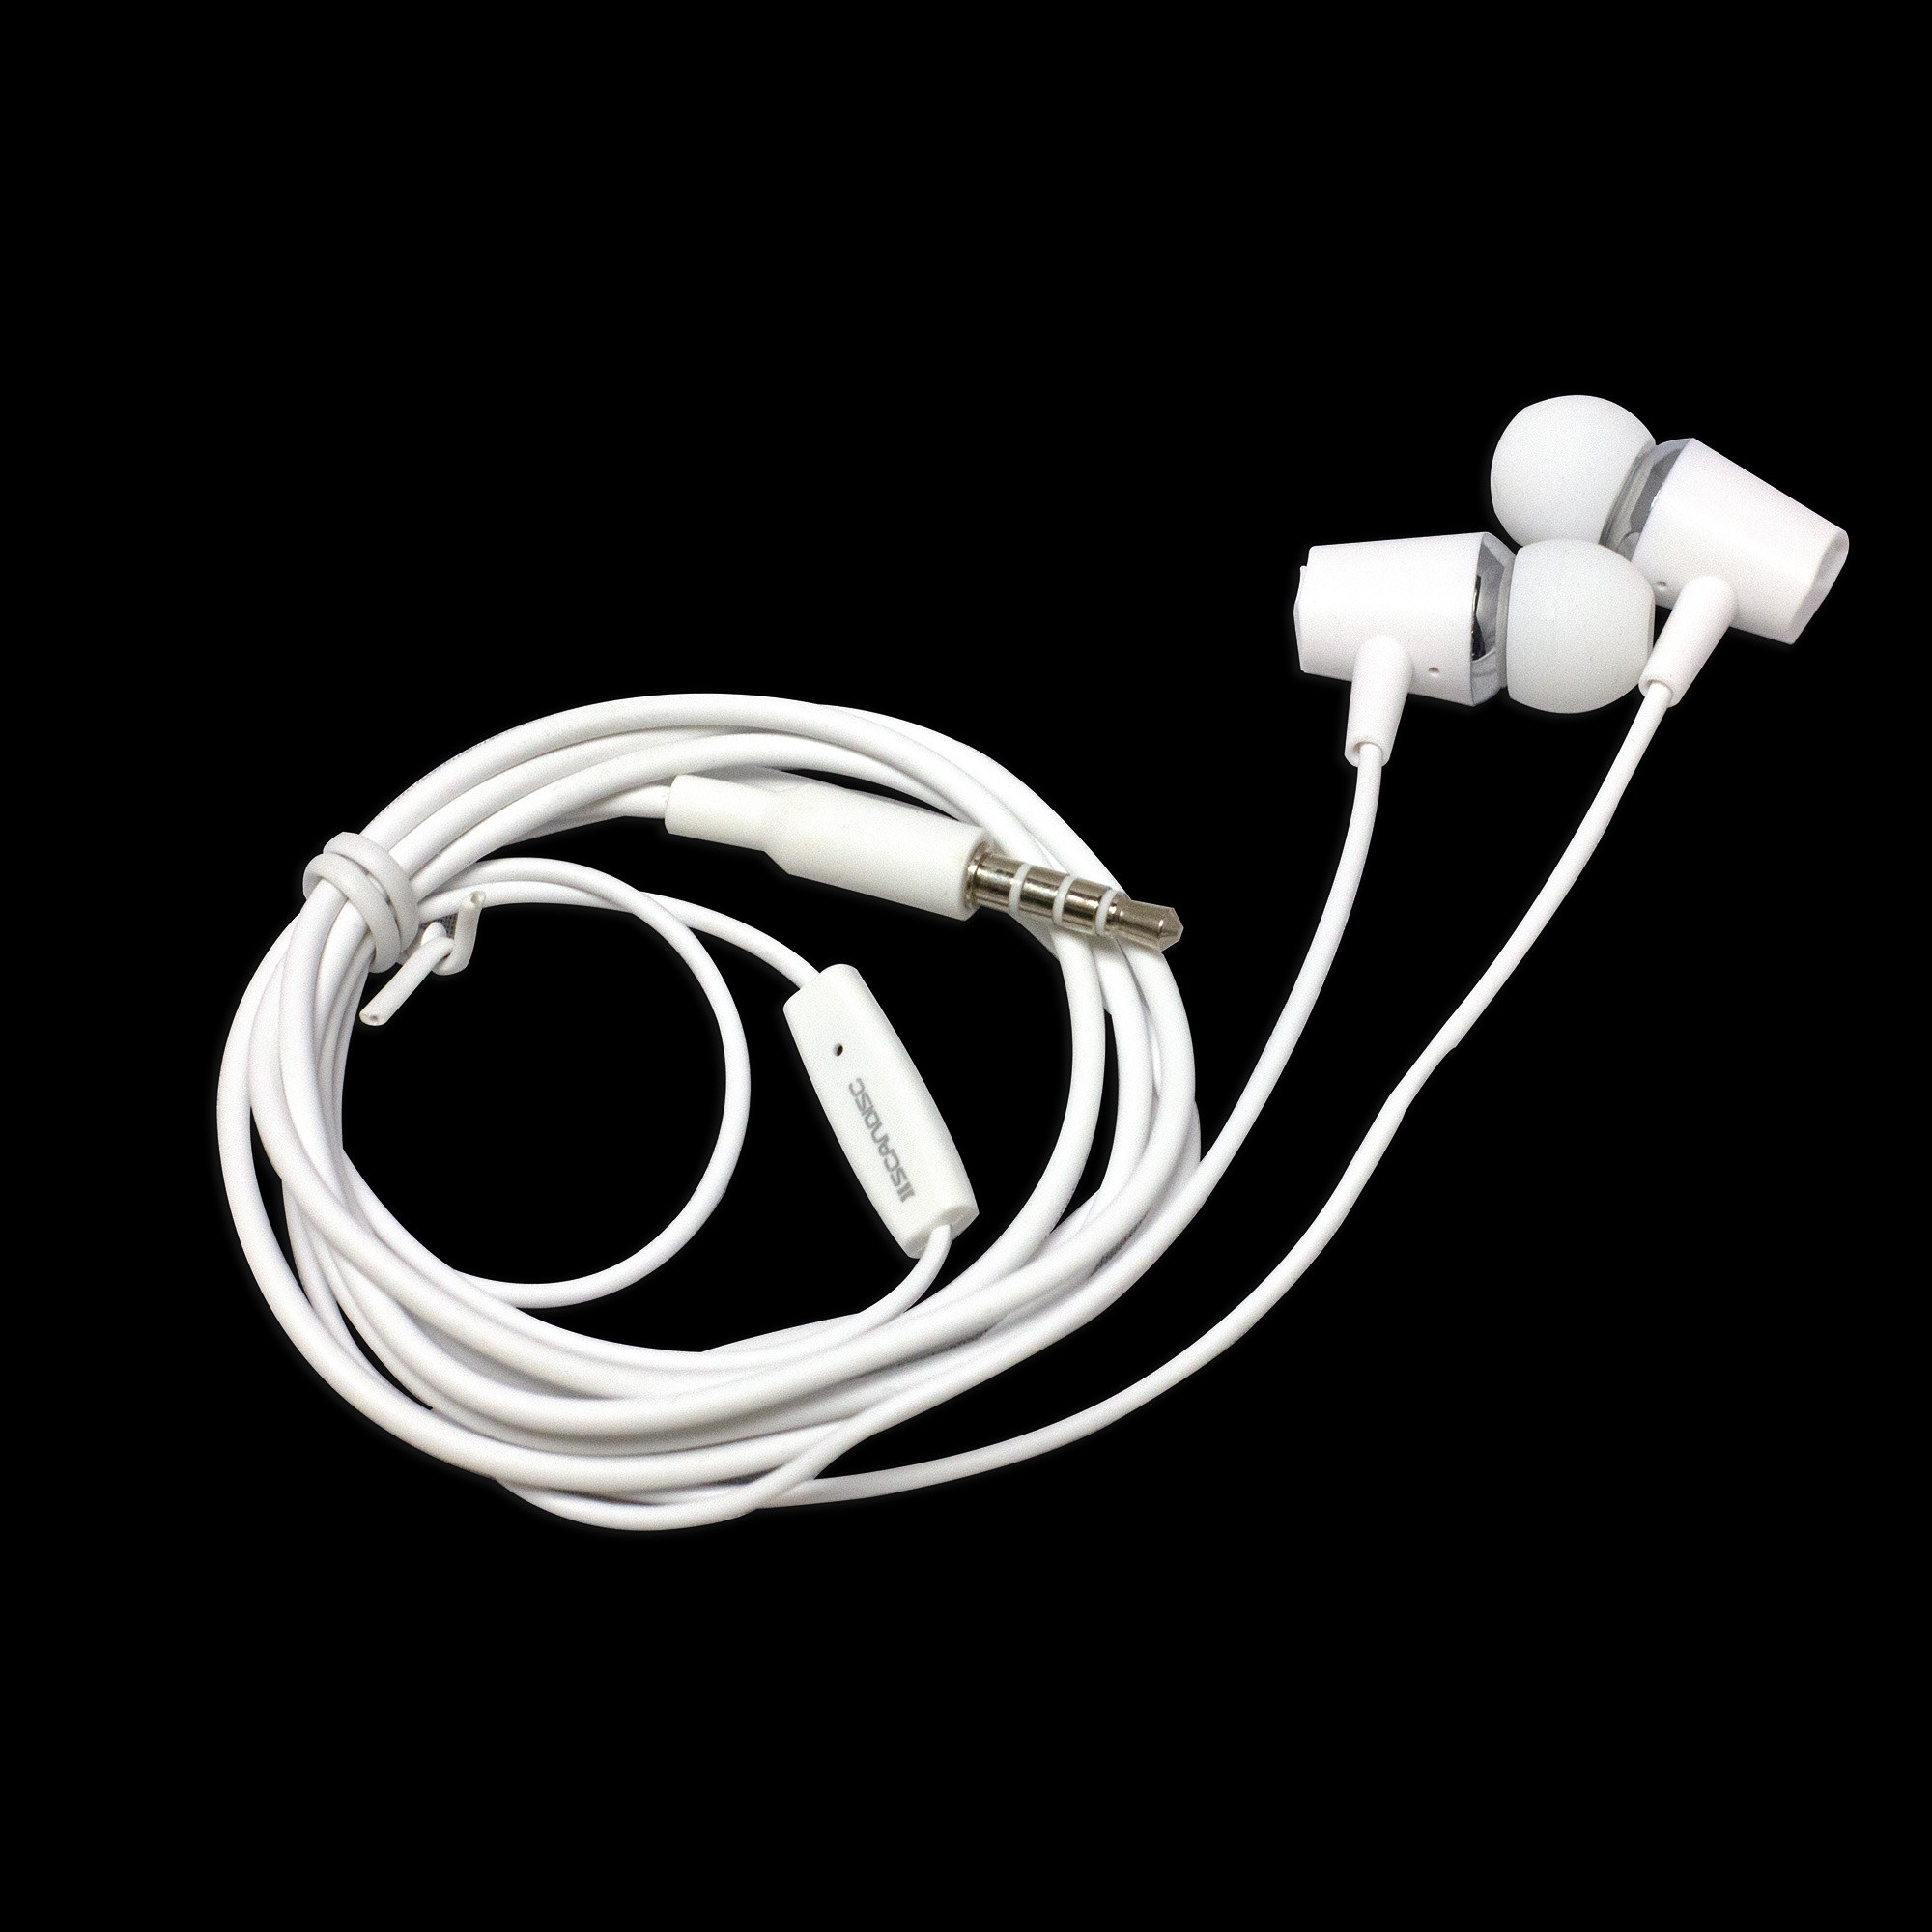 Smart Stereo Headphones - Coned Earbuds - White - Kanobe Triss Understands The Importance Of Quality When It Comes To All Things Audio. The Company’s Foundation Is Built On This Notion, Closely Followed By Affordability. Applying These Two Standards Led To The Development Of These Amazing Sounding Headphones.